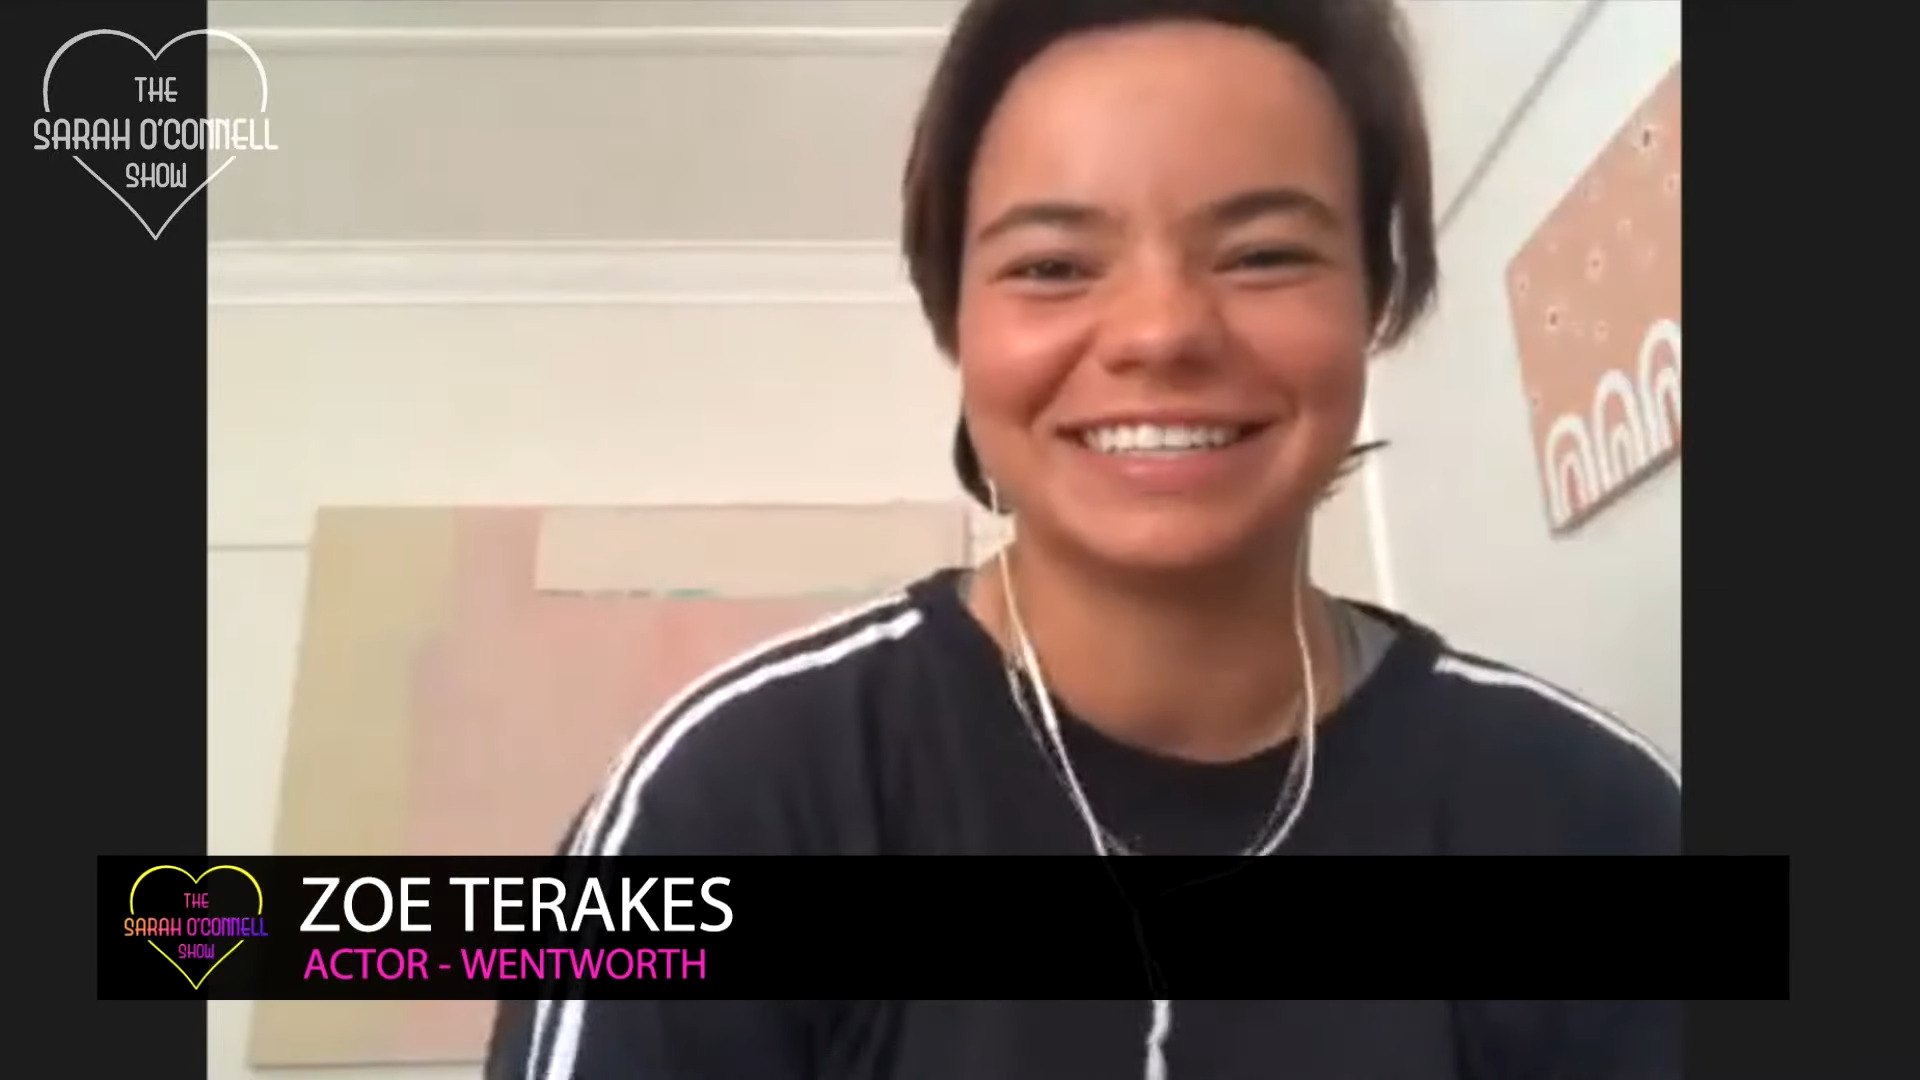 Zoe Terakes makes an appearance on the August 21st episode of ''The Sarah O'Connell Show'